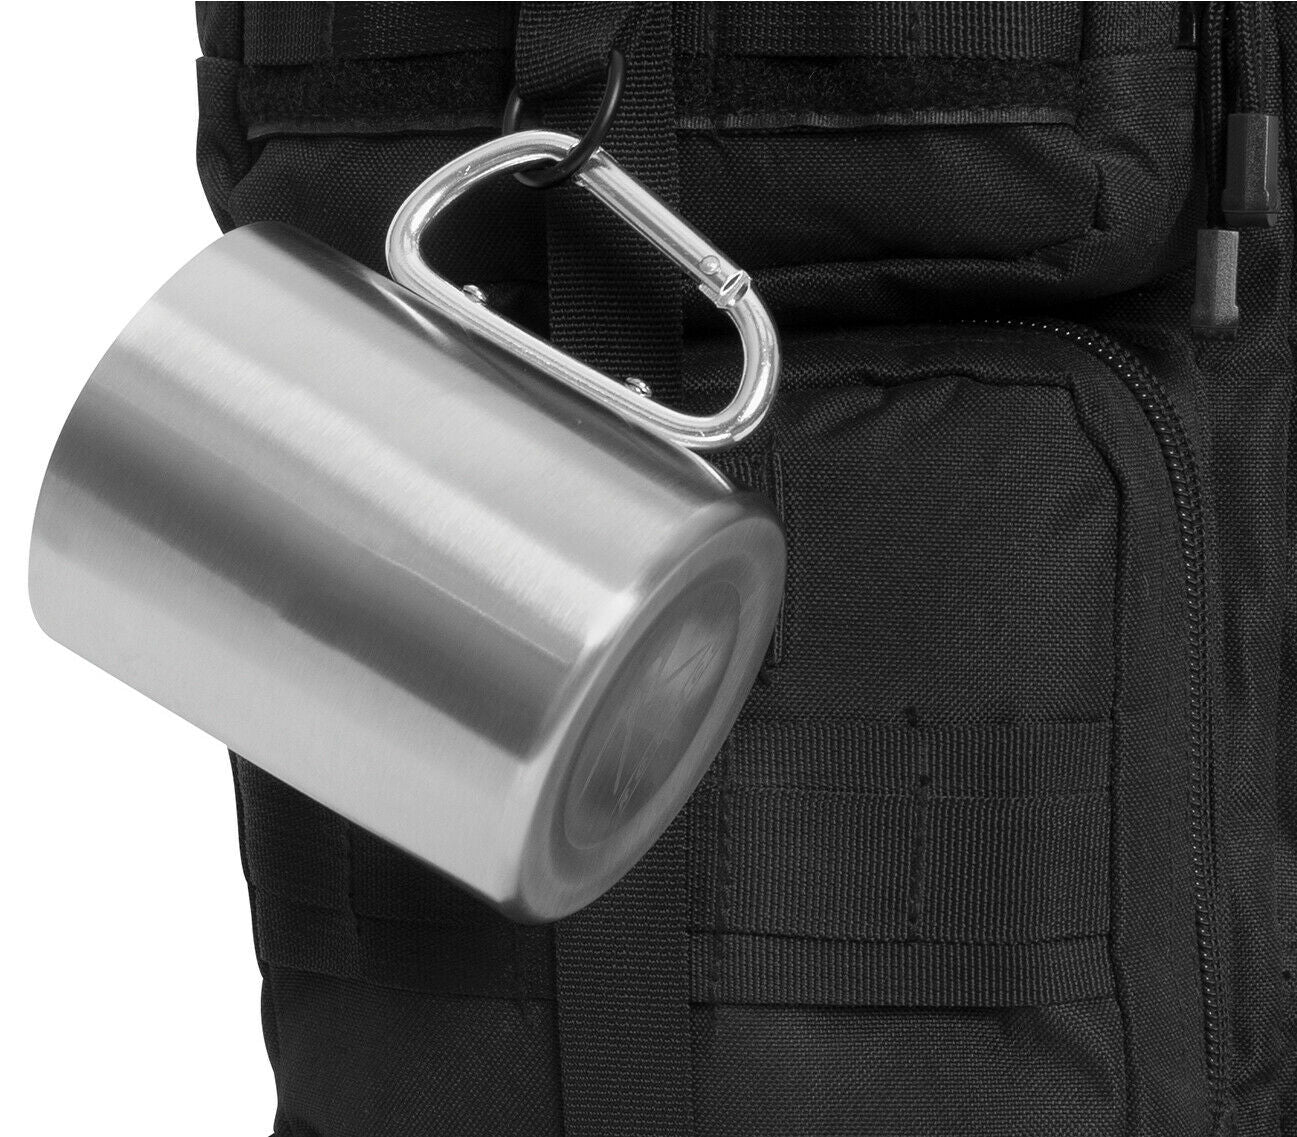 Rothco Insulated Stainless Steel Portable Camping Mug With Carabiner Handle – 15 oz